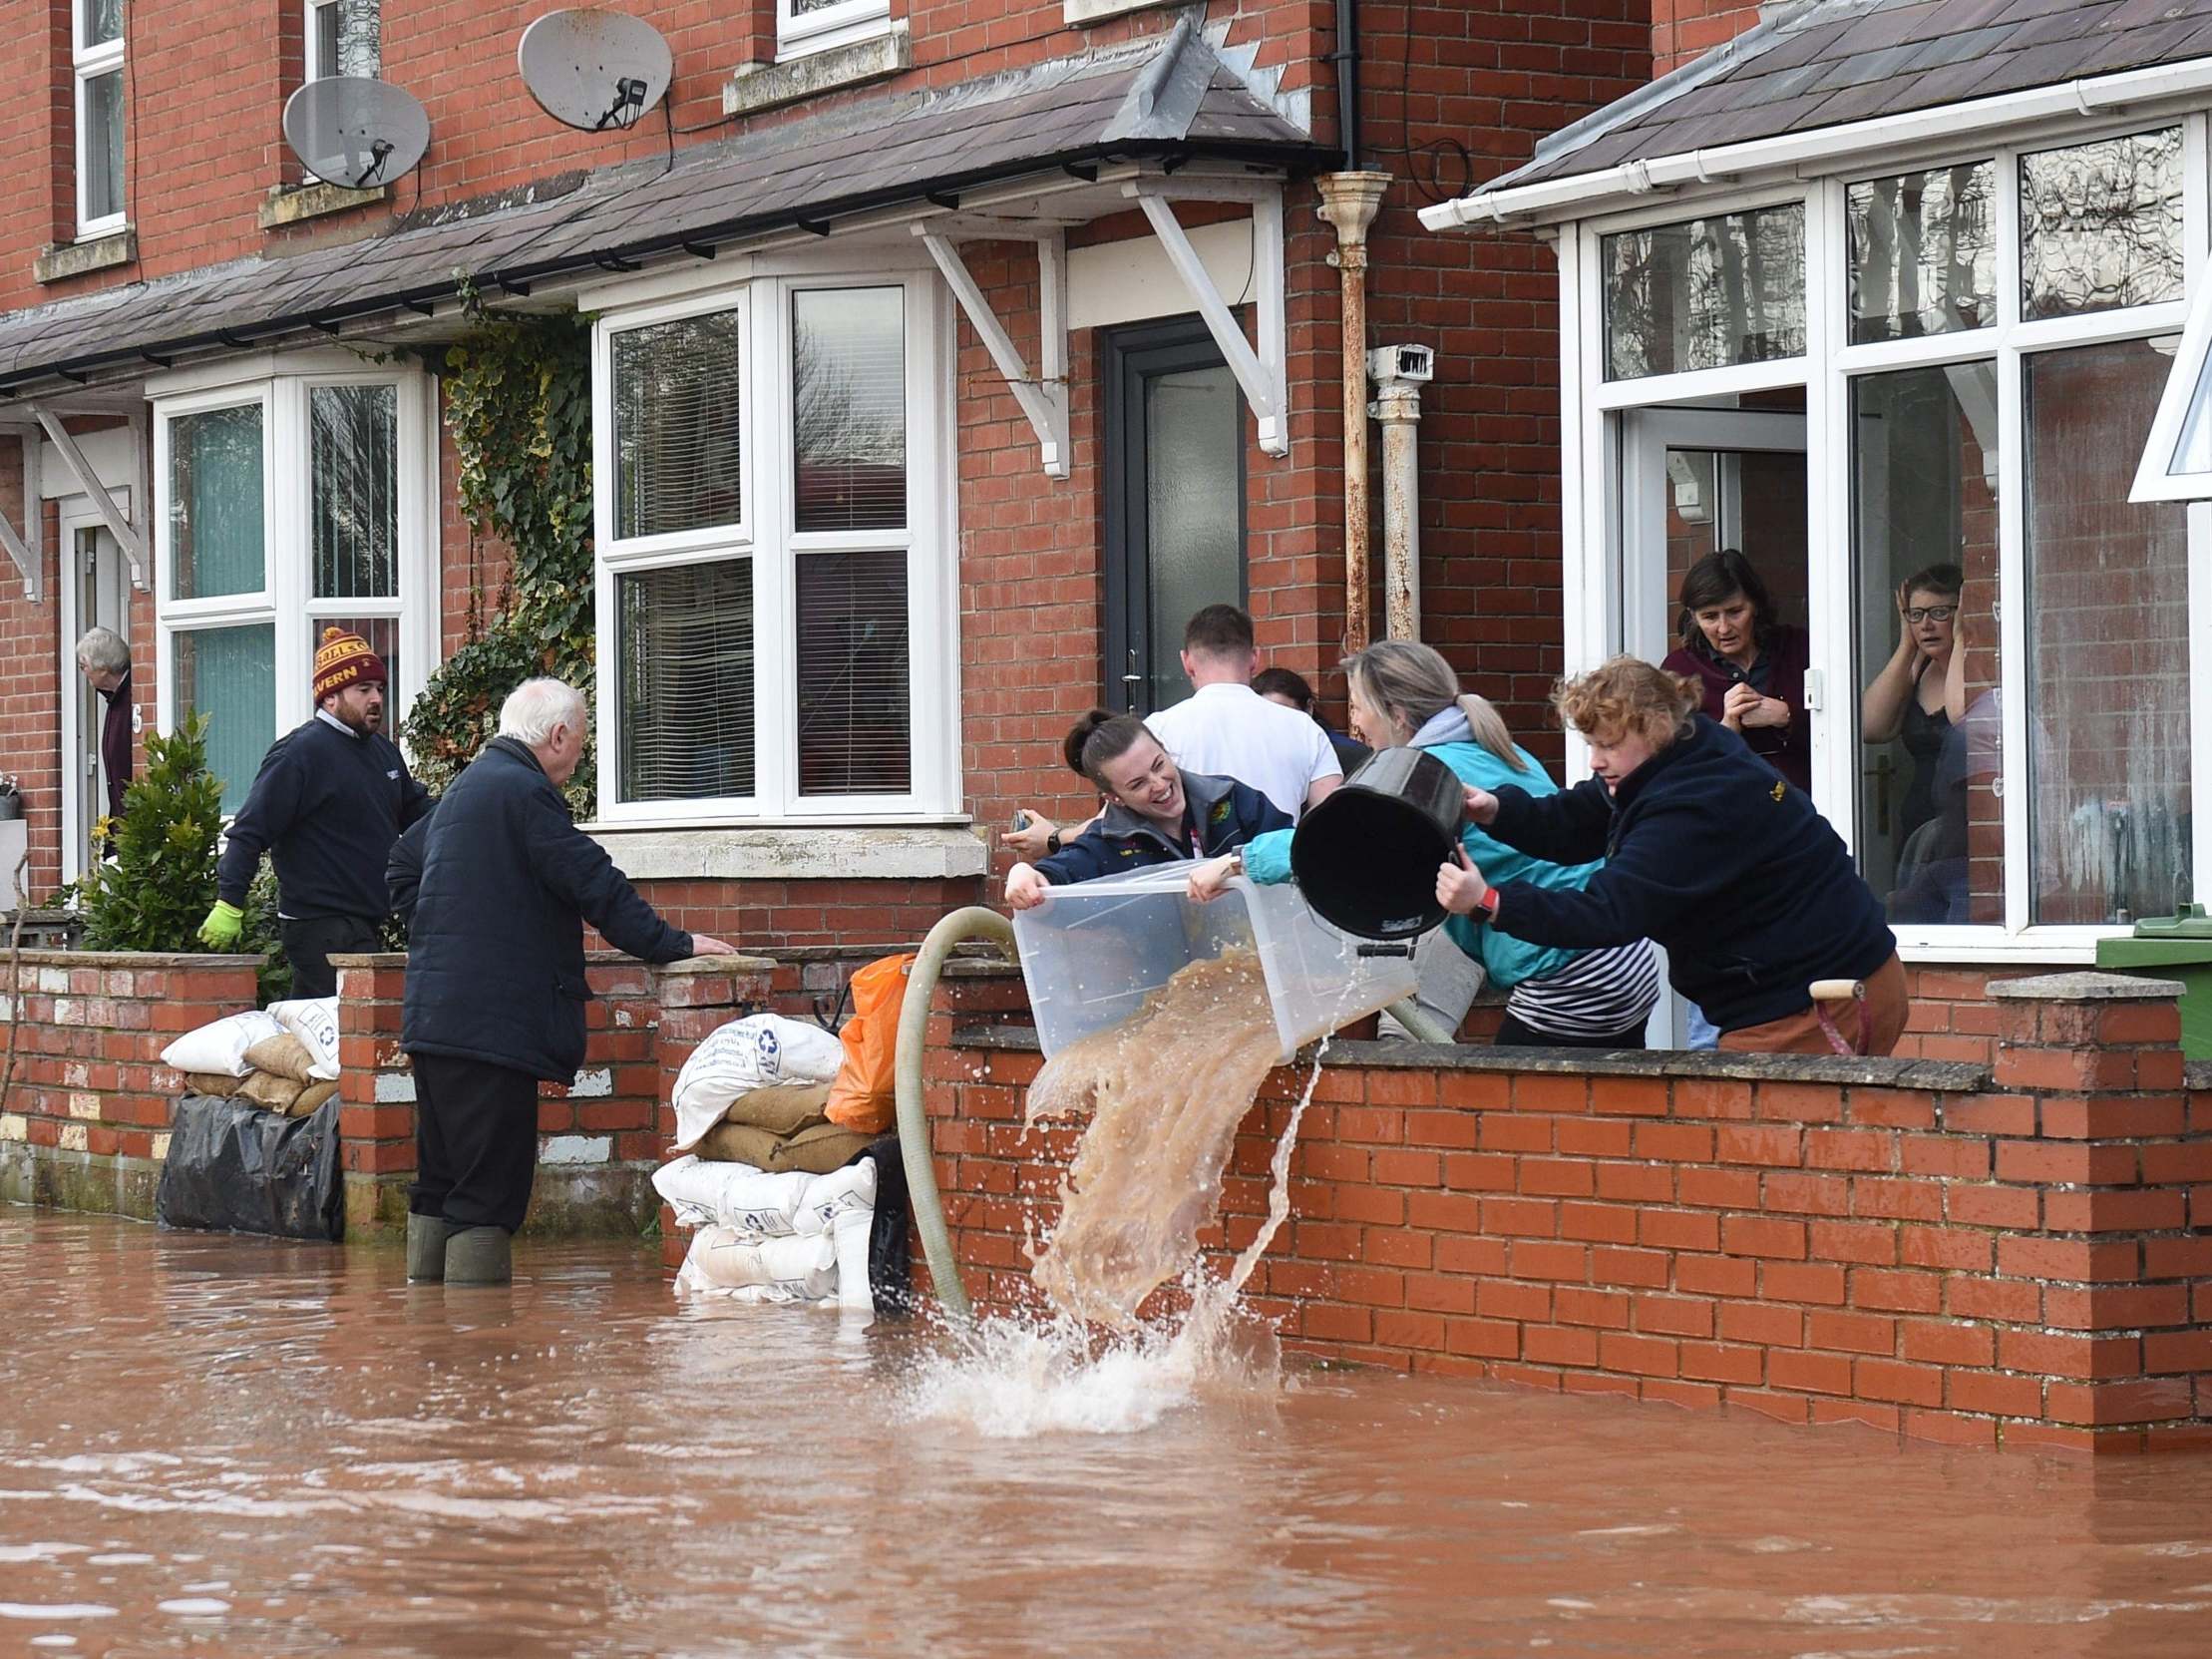 Water is bailed out of flooded homes after the River Wye burst its banks in Ross-on-Wye